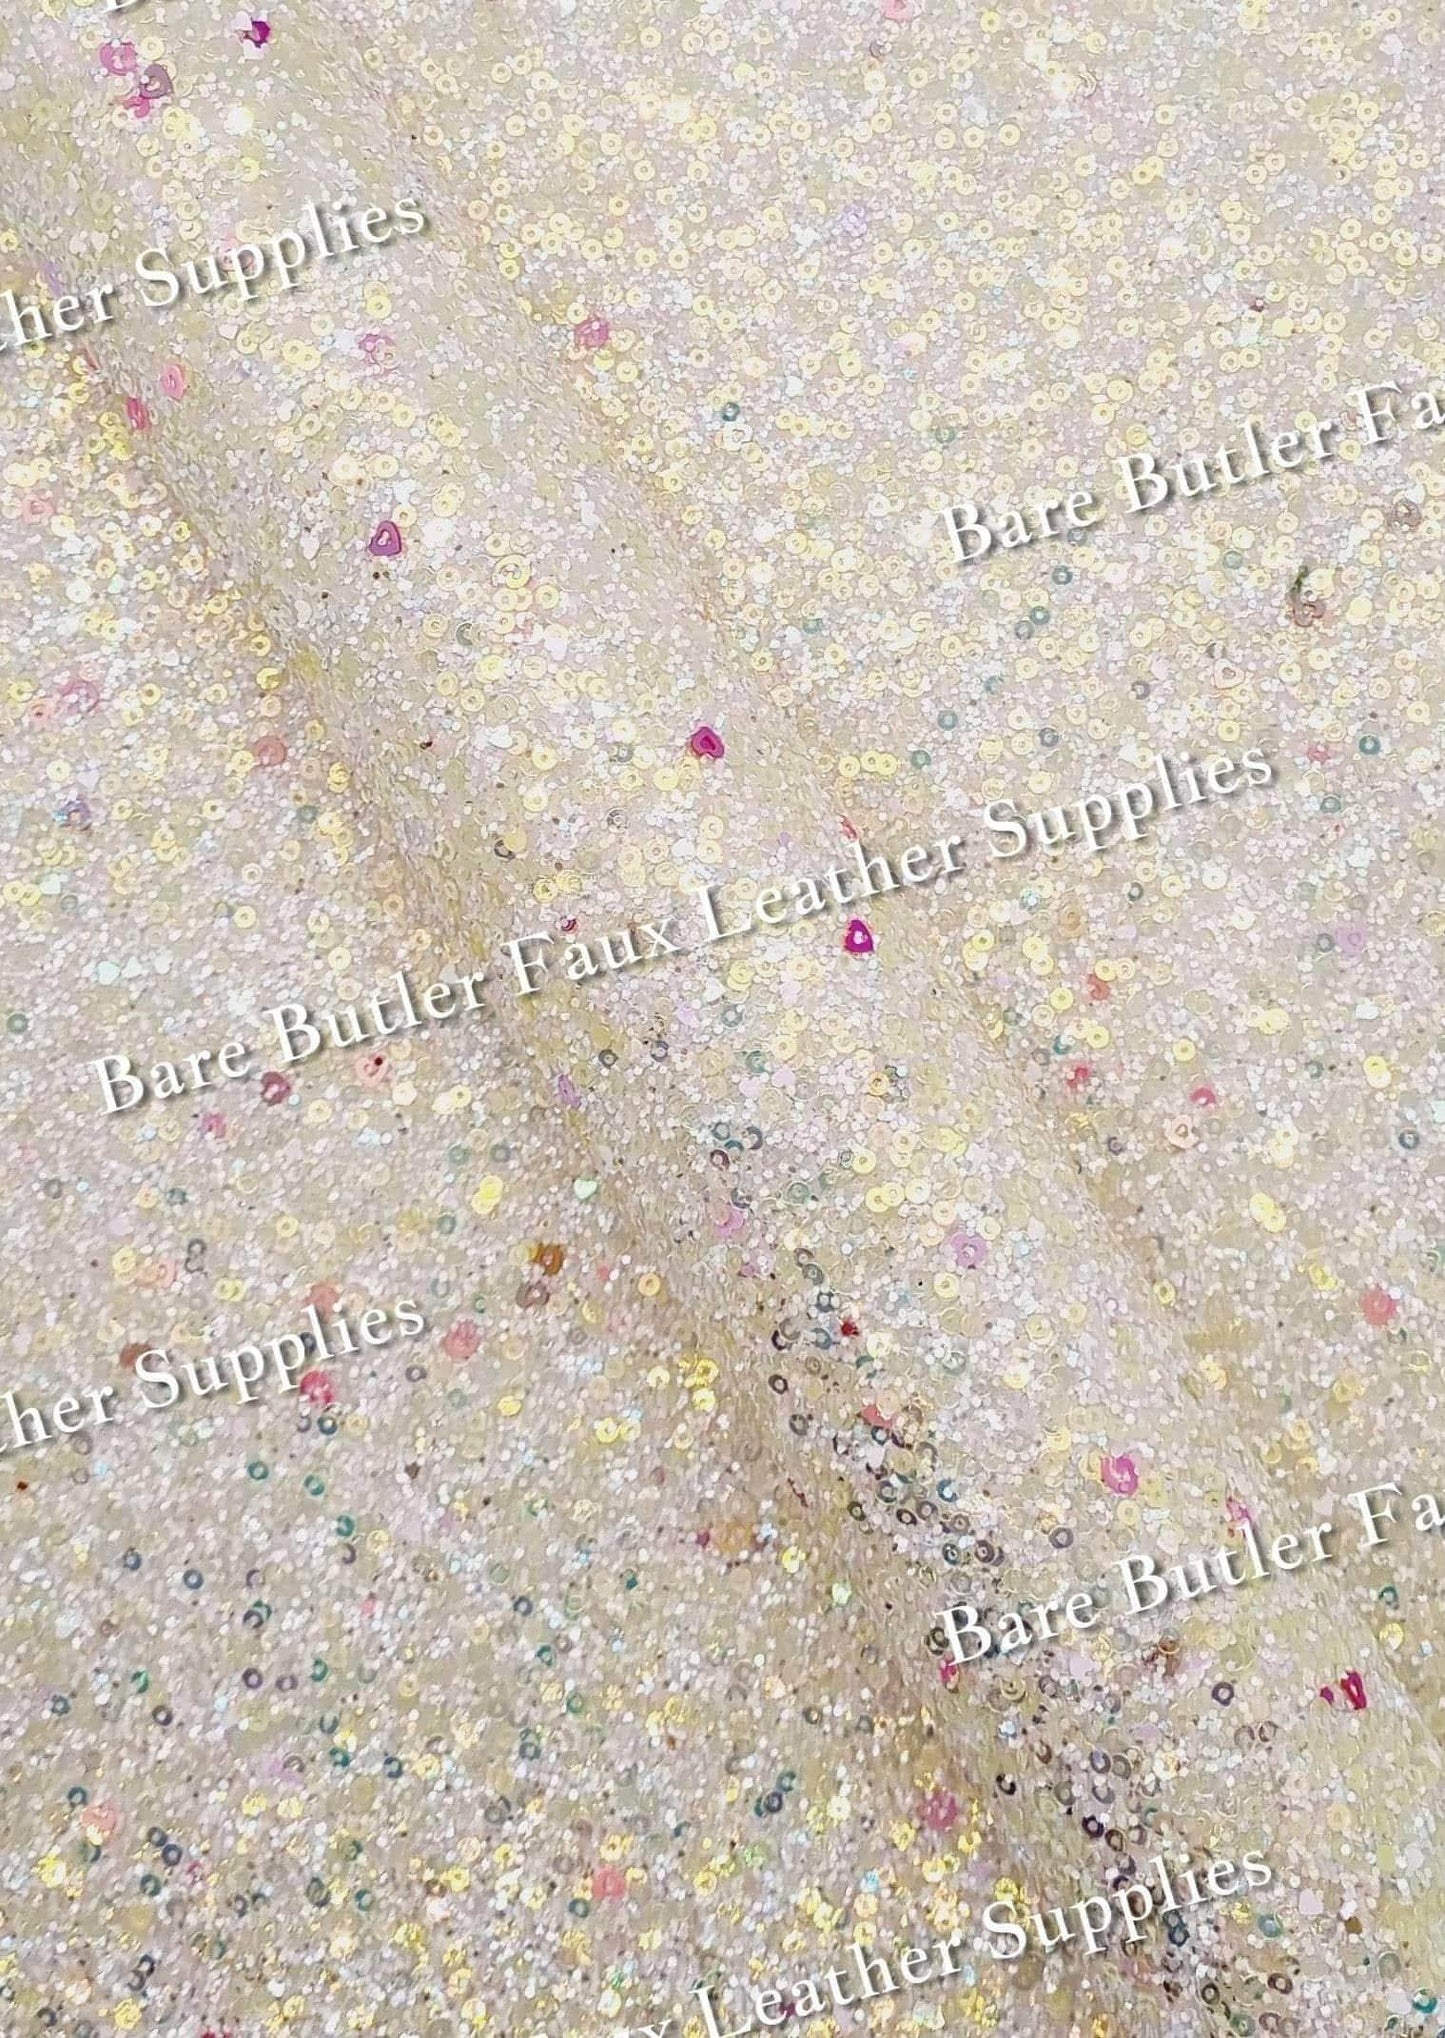 Chunky Glitter Sequin Mix White - chunky, Faux, Faux Leather, Glitter, Leather, leatherette, Sequin - Bare Butler Faux Leather Supplies 